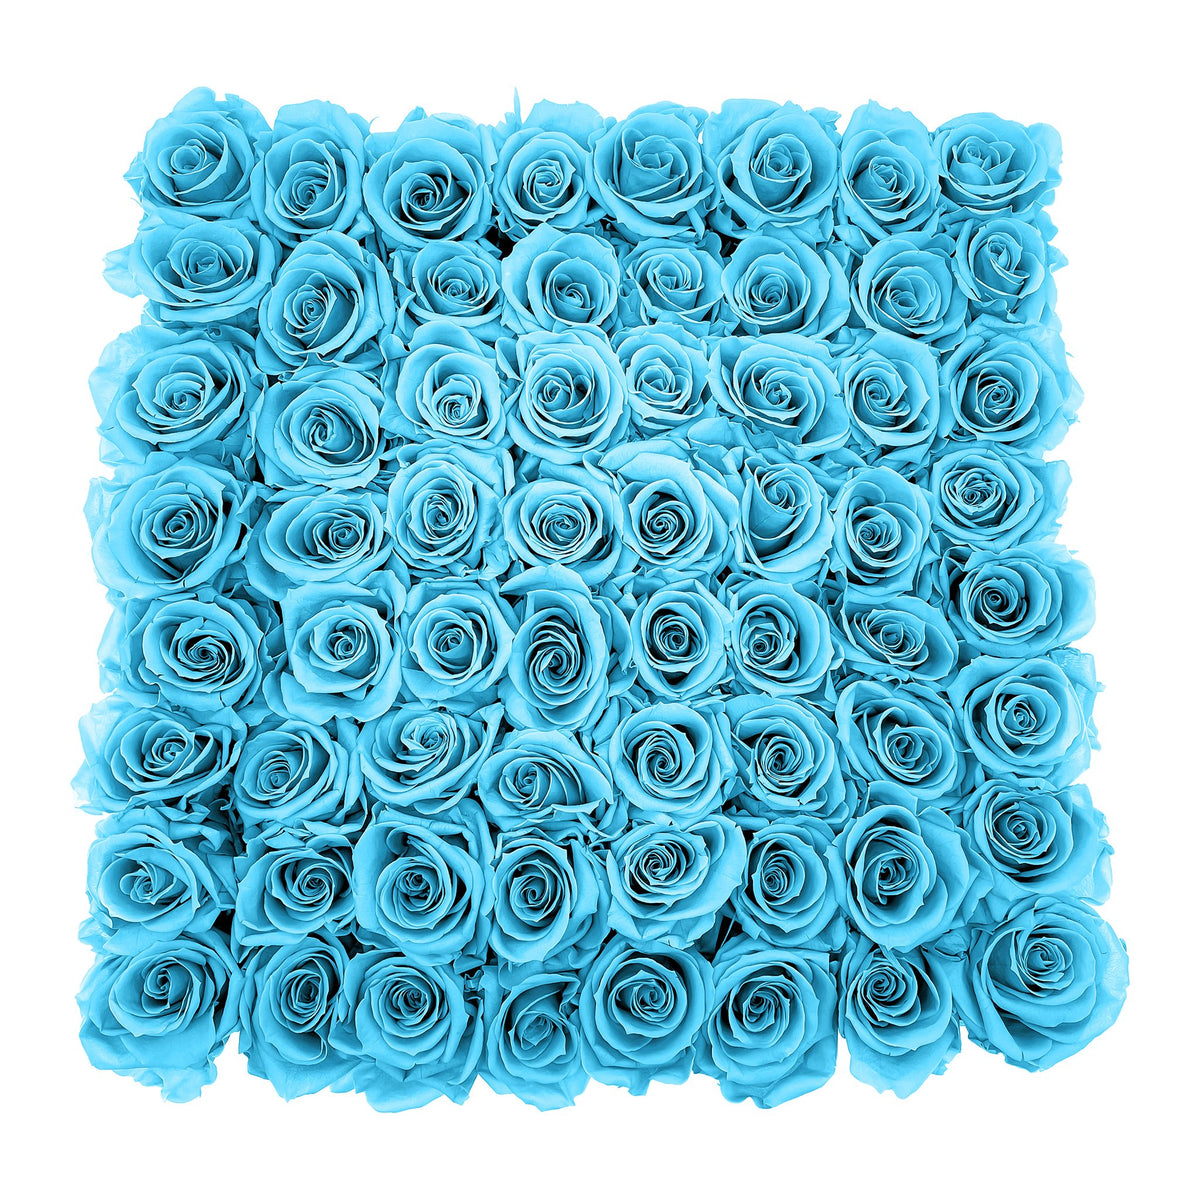 Preserved Roses Large Box | Bright Turquoise - Roses